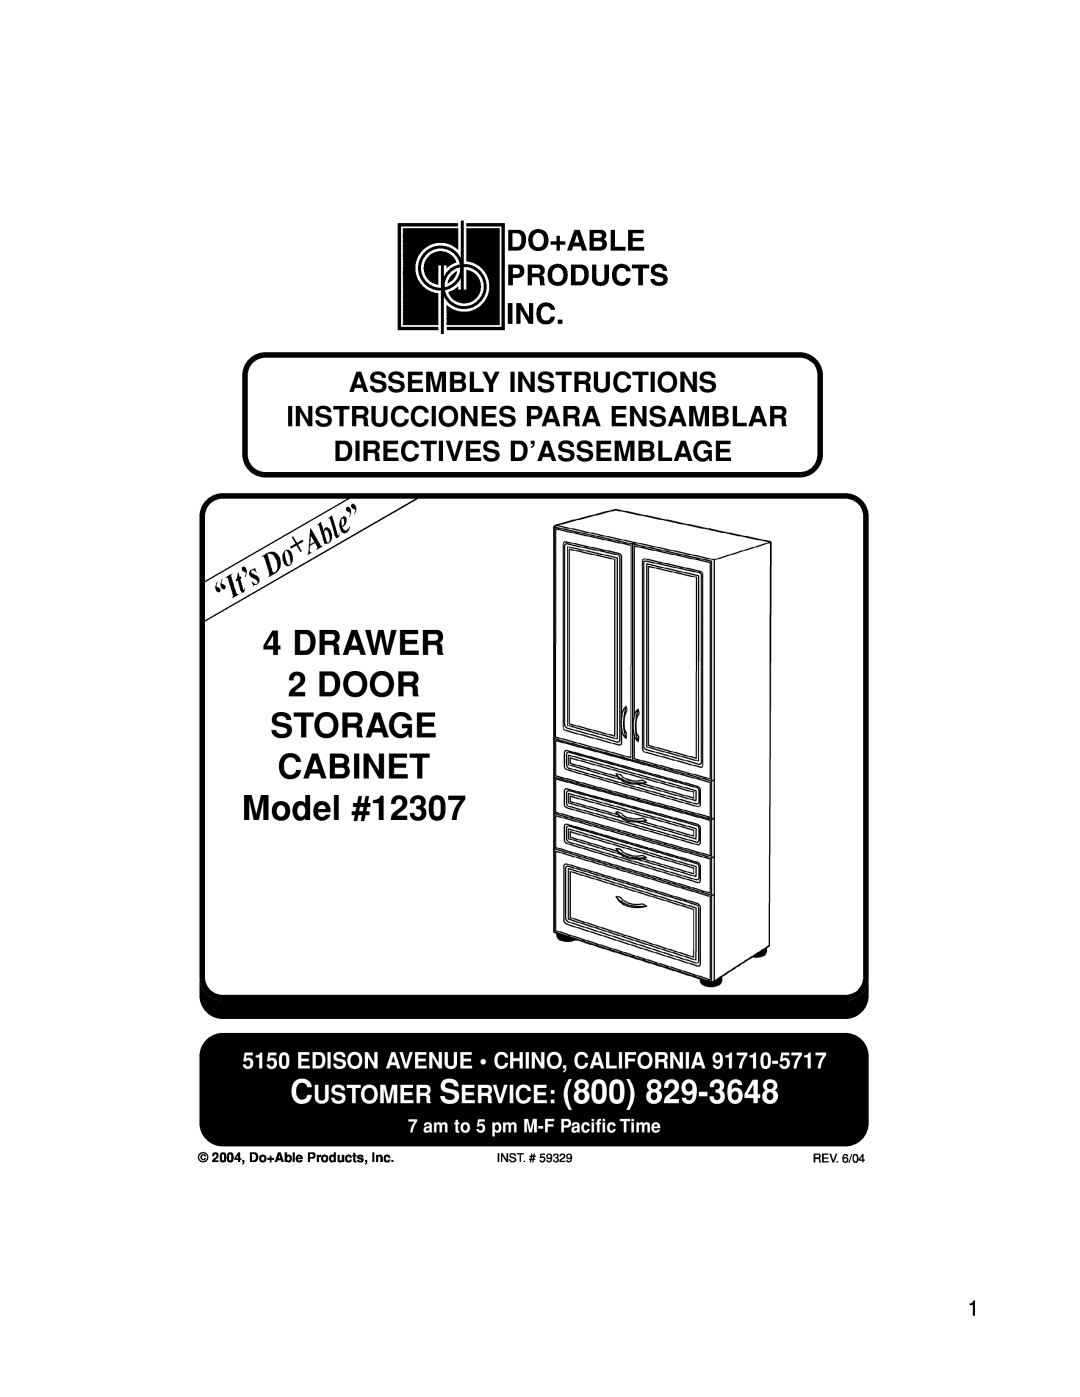 Closet Maid manual DRAWER 2DOOR STORAGE CABINET Model #12307, Customer Service, Assembly Instructions 